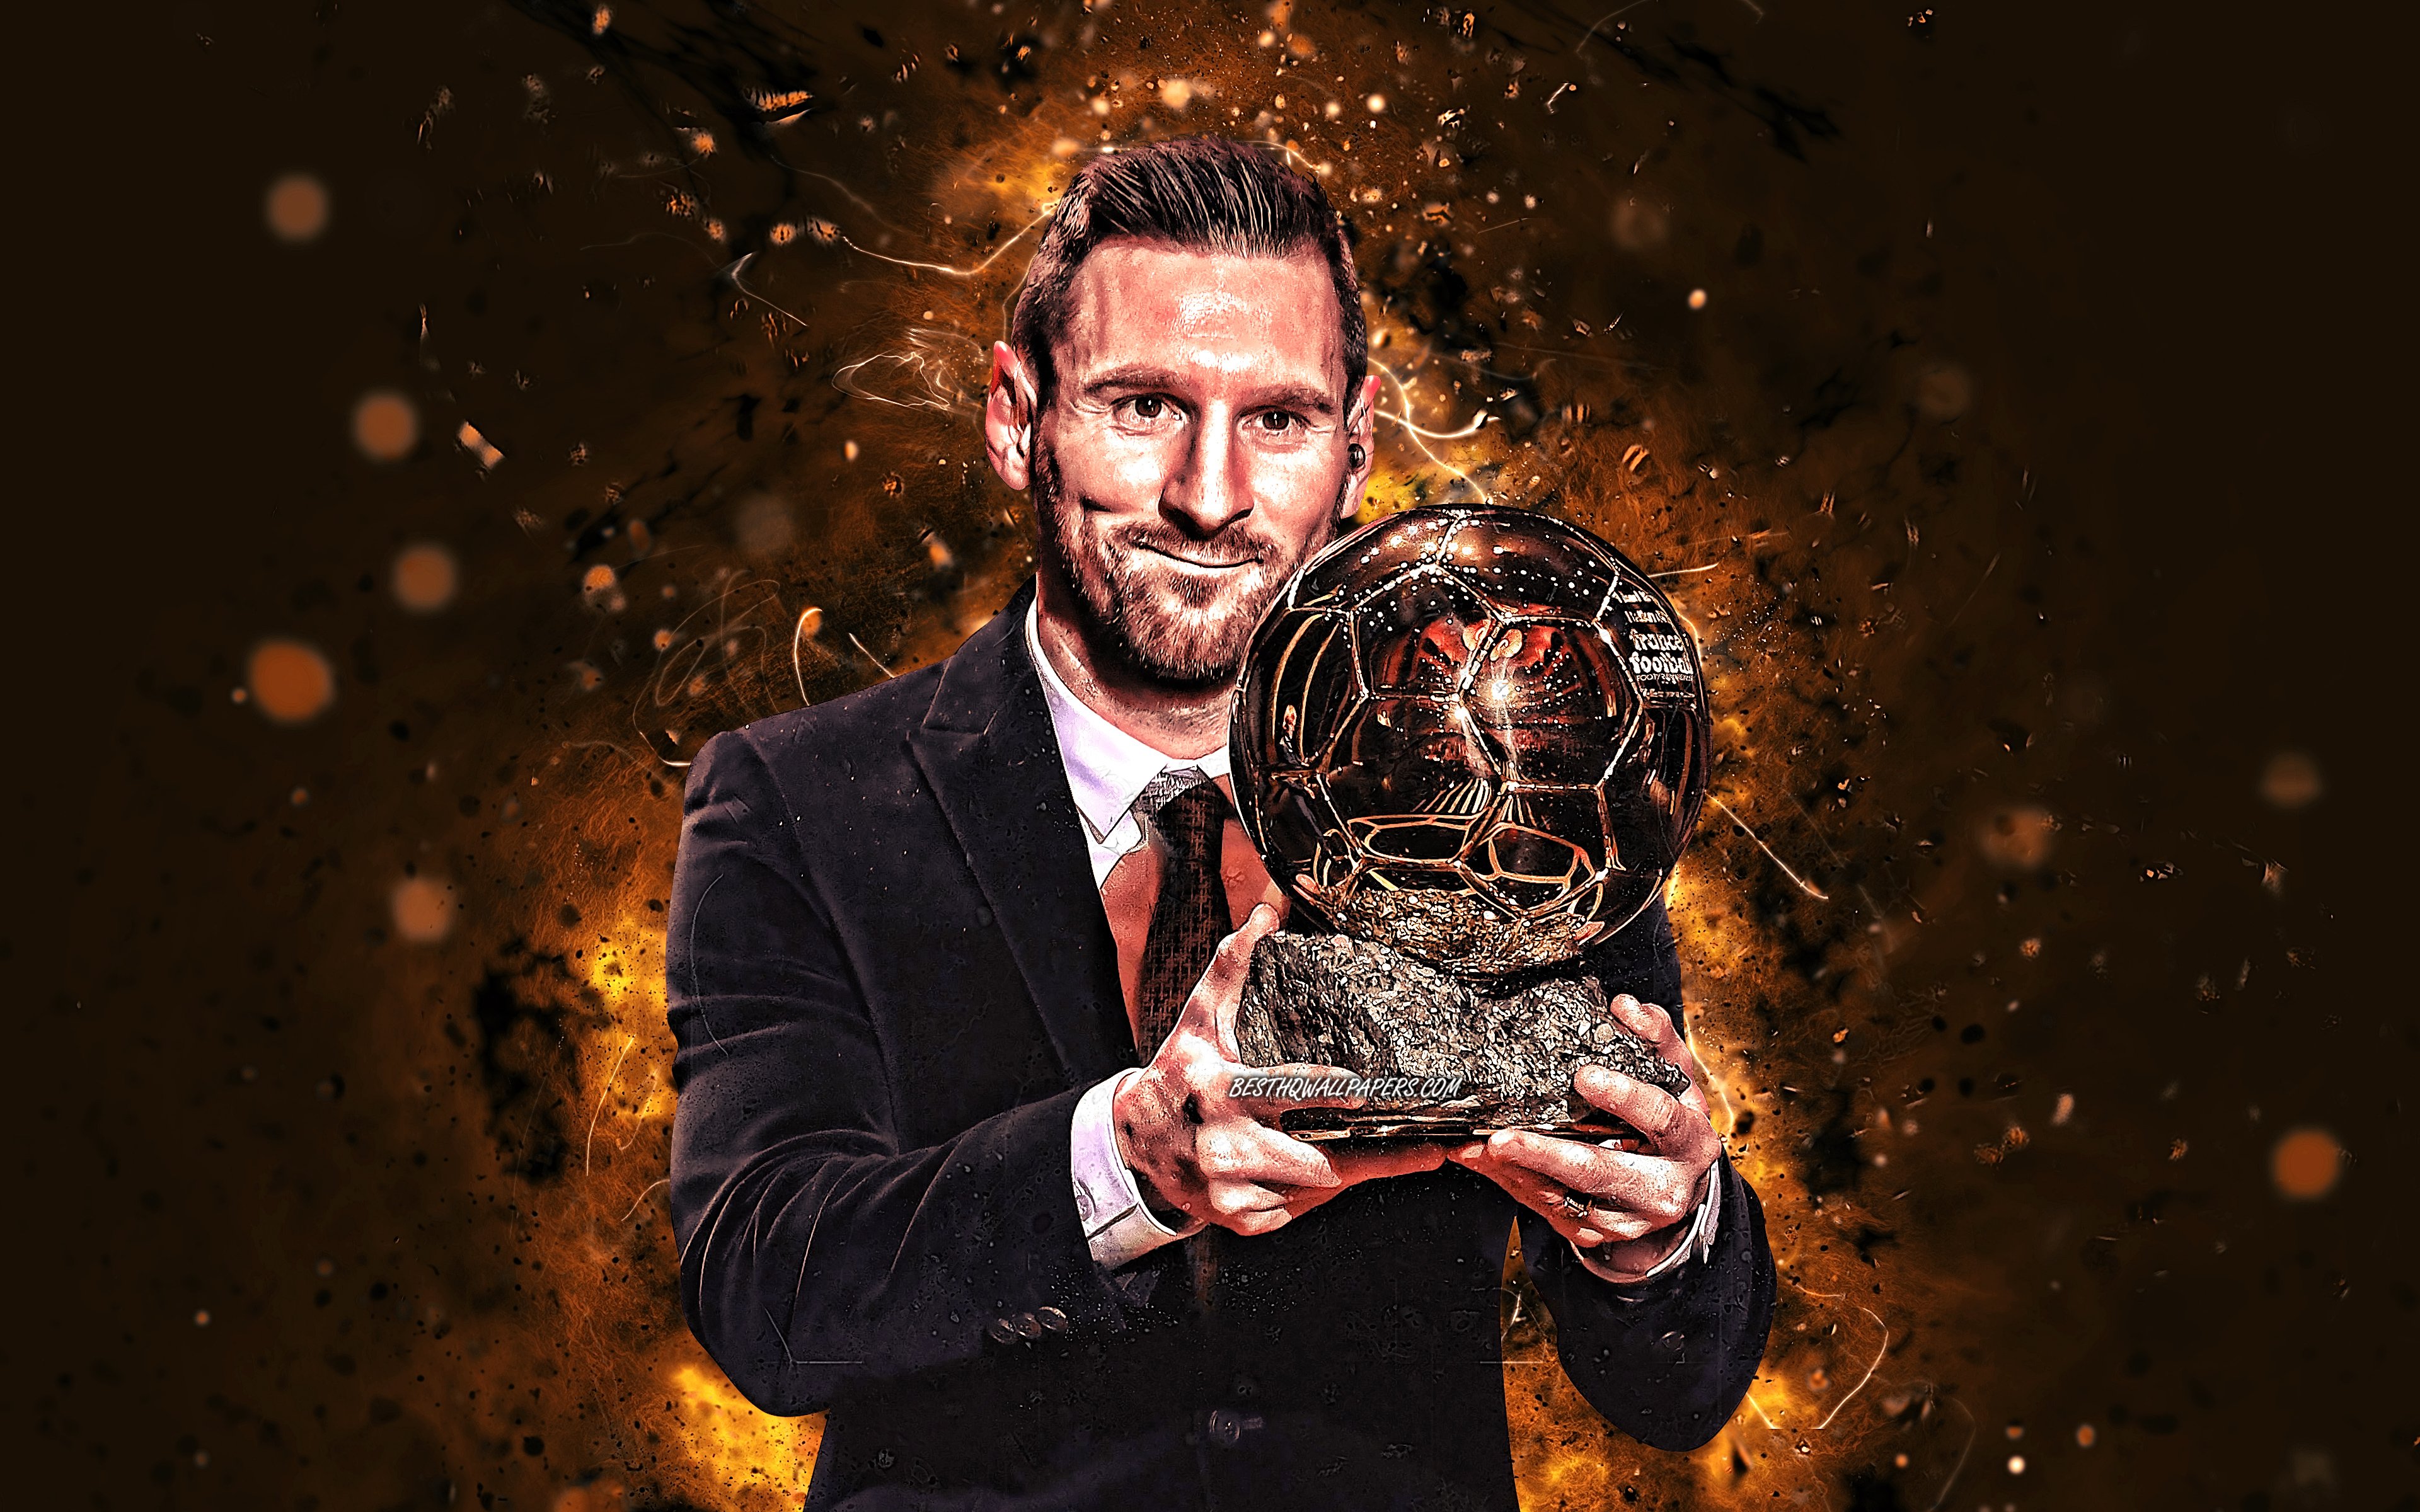 Download wallpapers Lionel Messi with golden ball, 4k, Barcelona FC